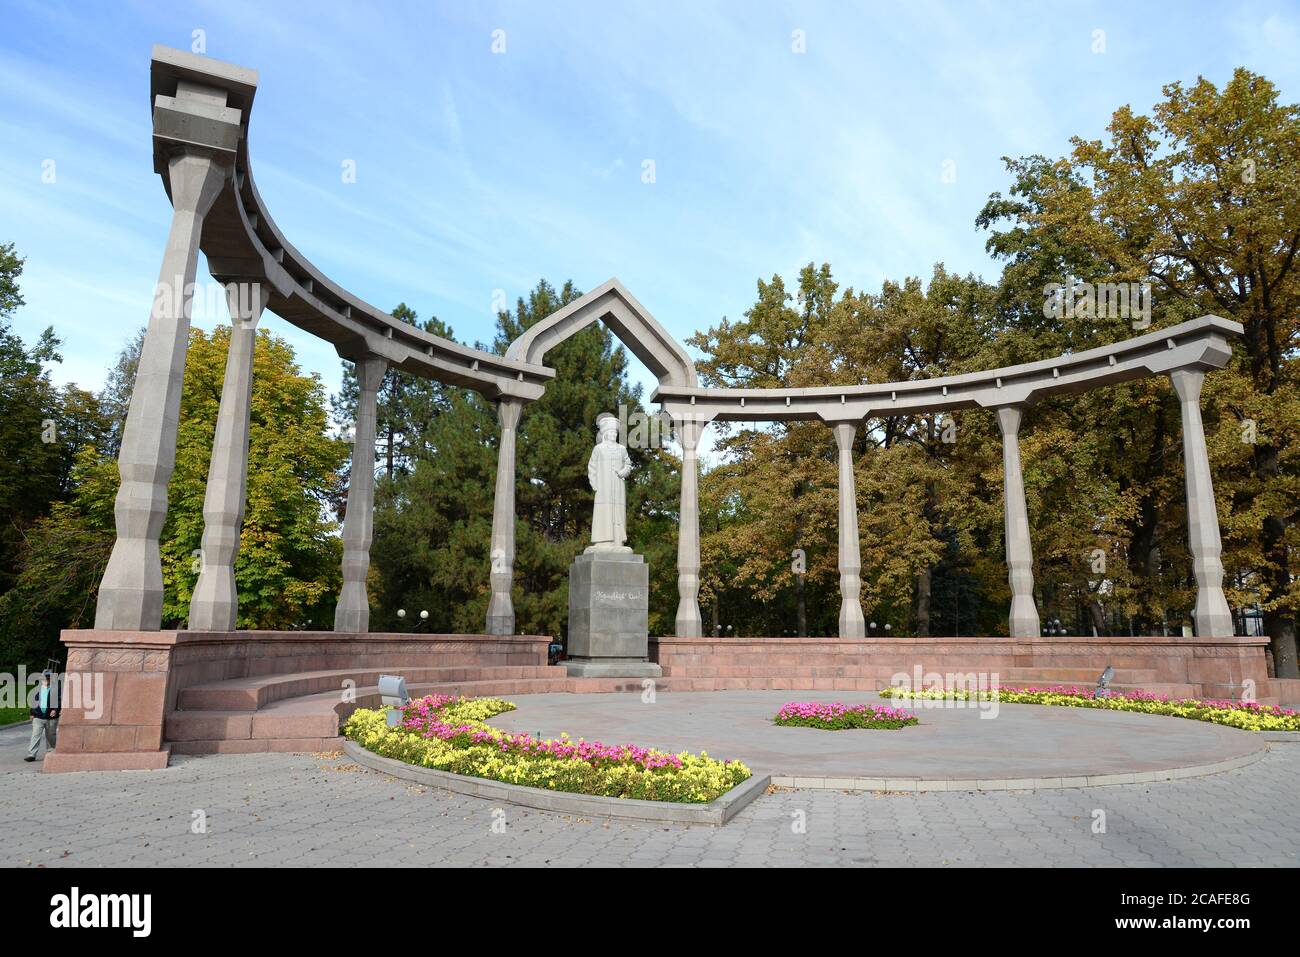 Statue of Kurmanjan Datka in Bishkek, Kyrgyzstan. Also know as Tsaritsa of Alai and Queen of the South. Statue of Kurmanjan Datka in Dubovy Park Stock Photo